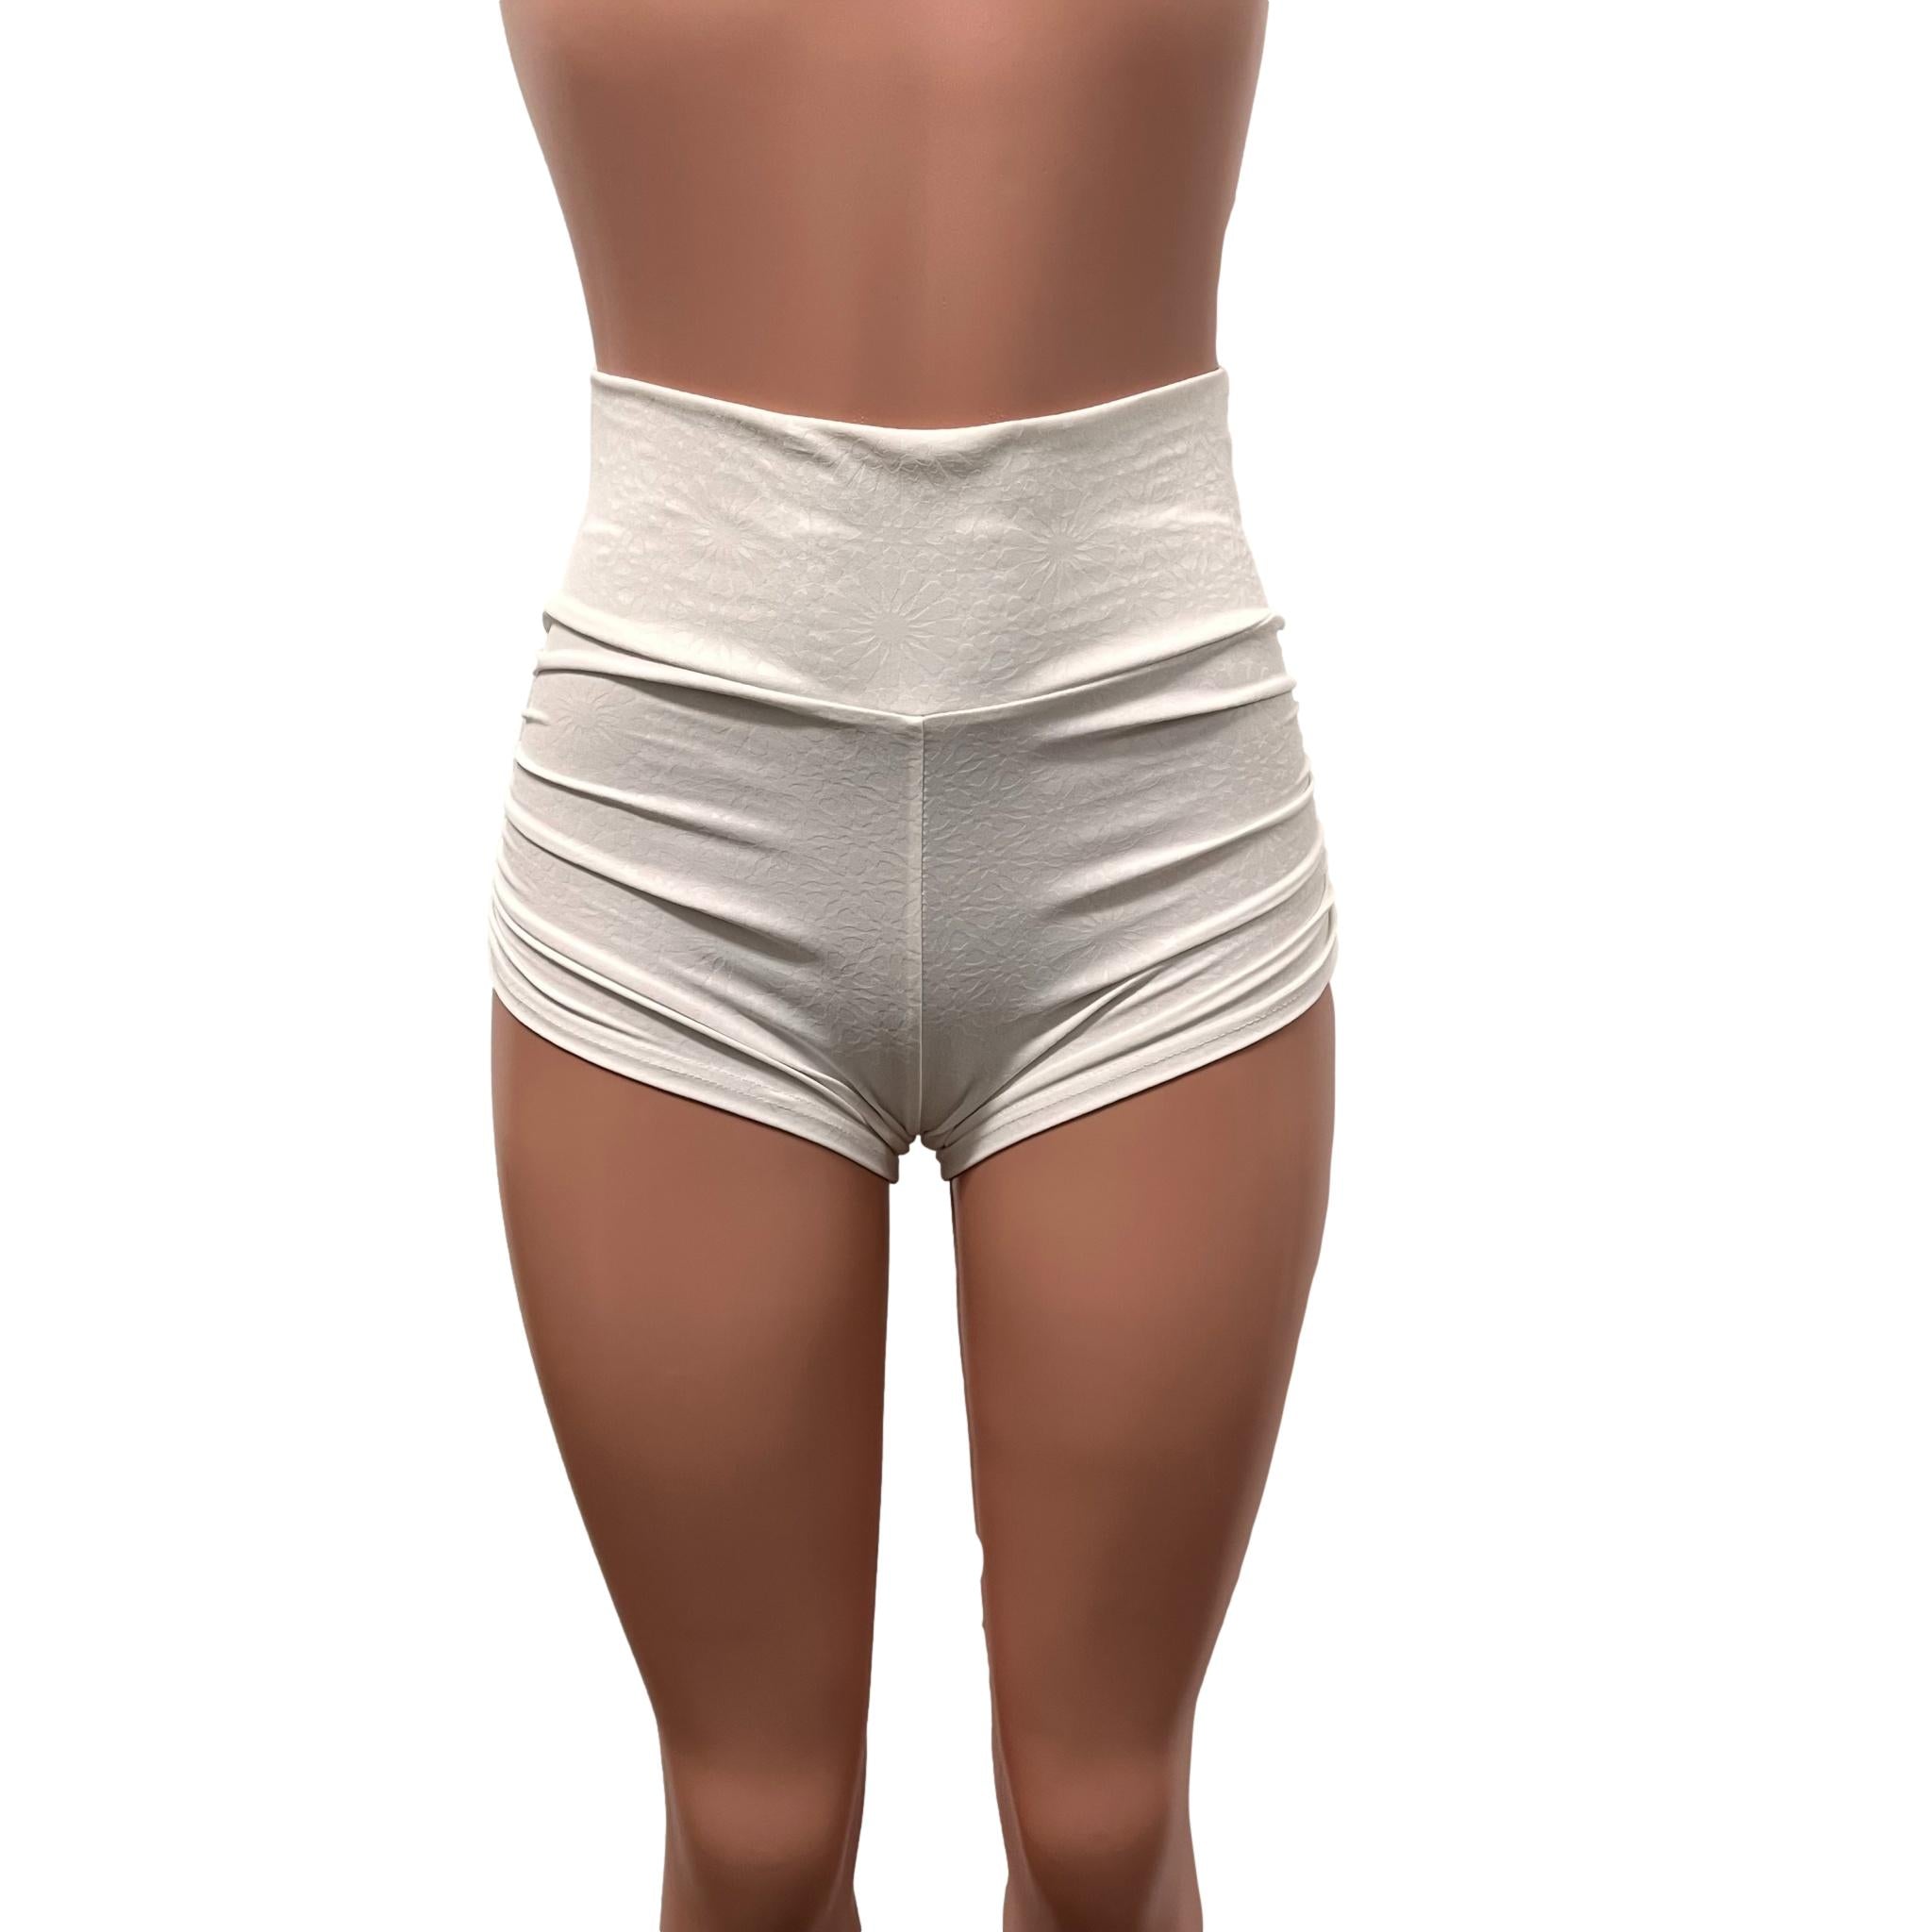 White Embossed Ruched Booty Shorts - Choose Low-Rise, Mid-Rise, Or